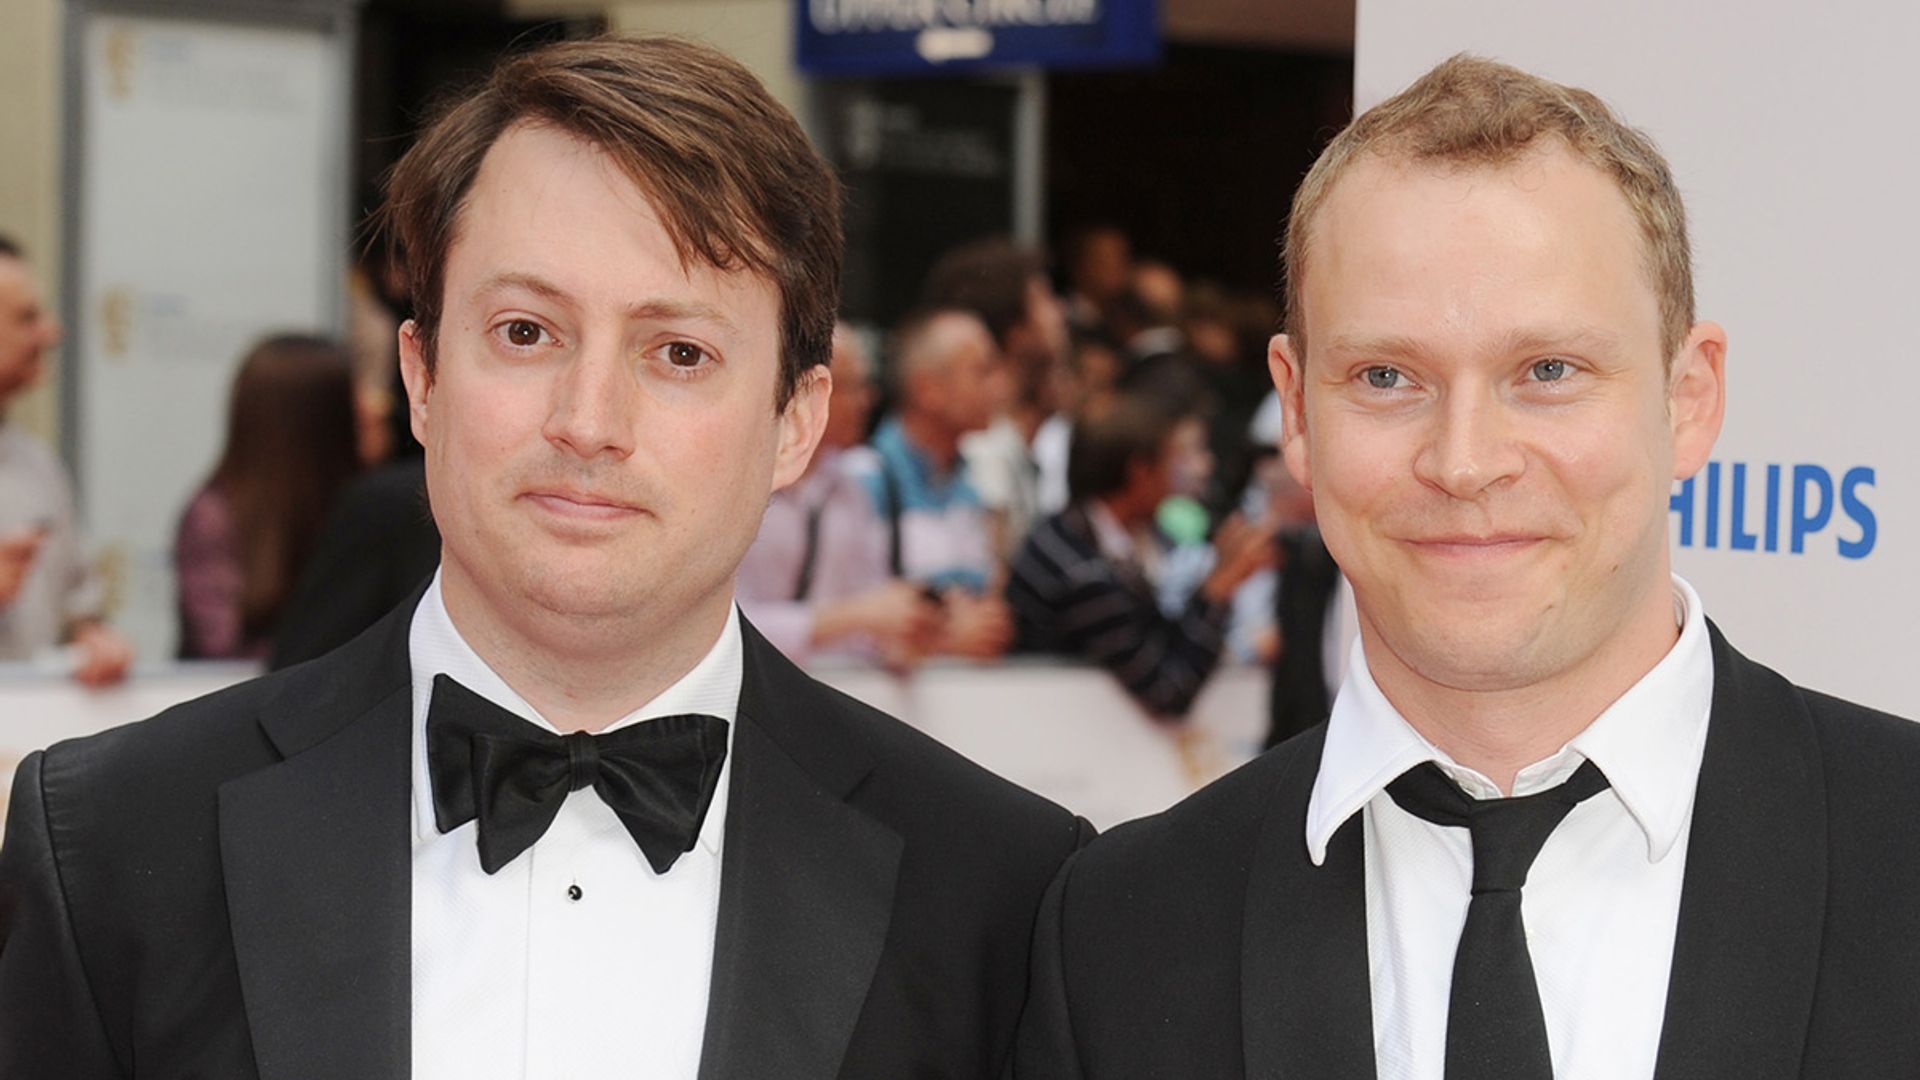 Robert Webb and David Mitchell's career in photos – take a look back